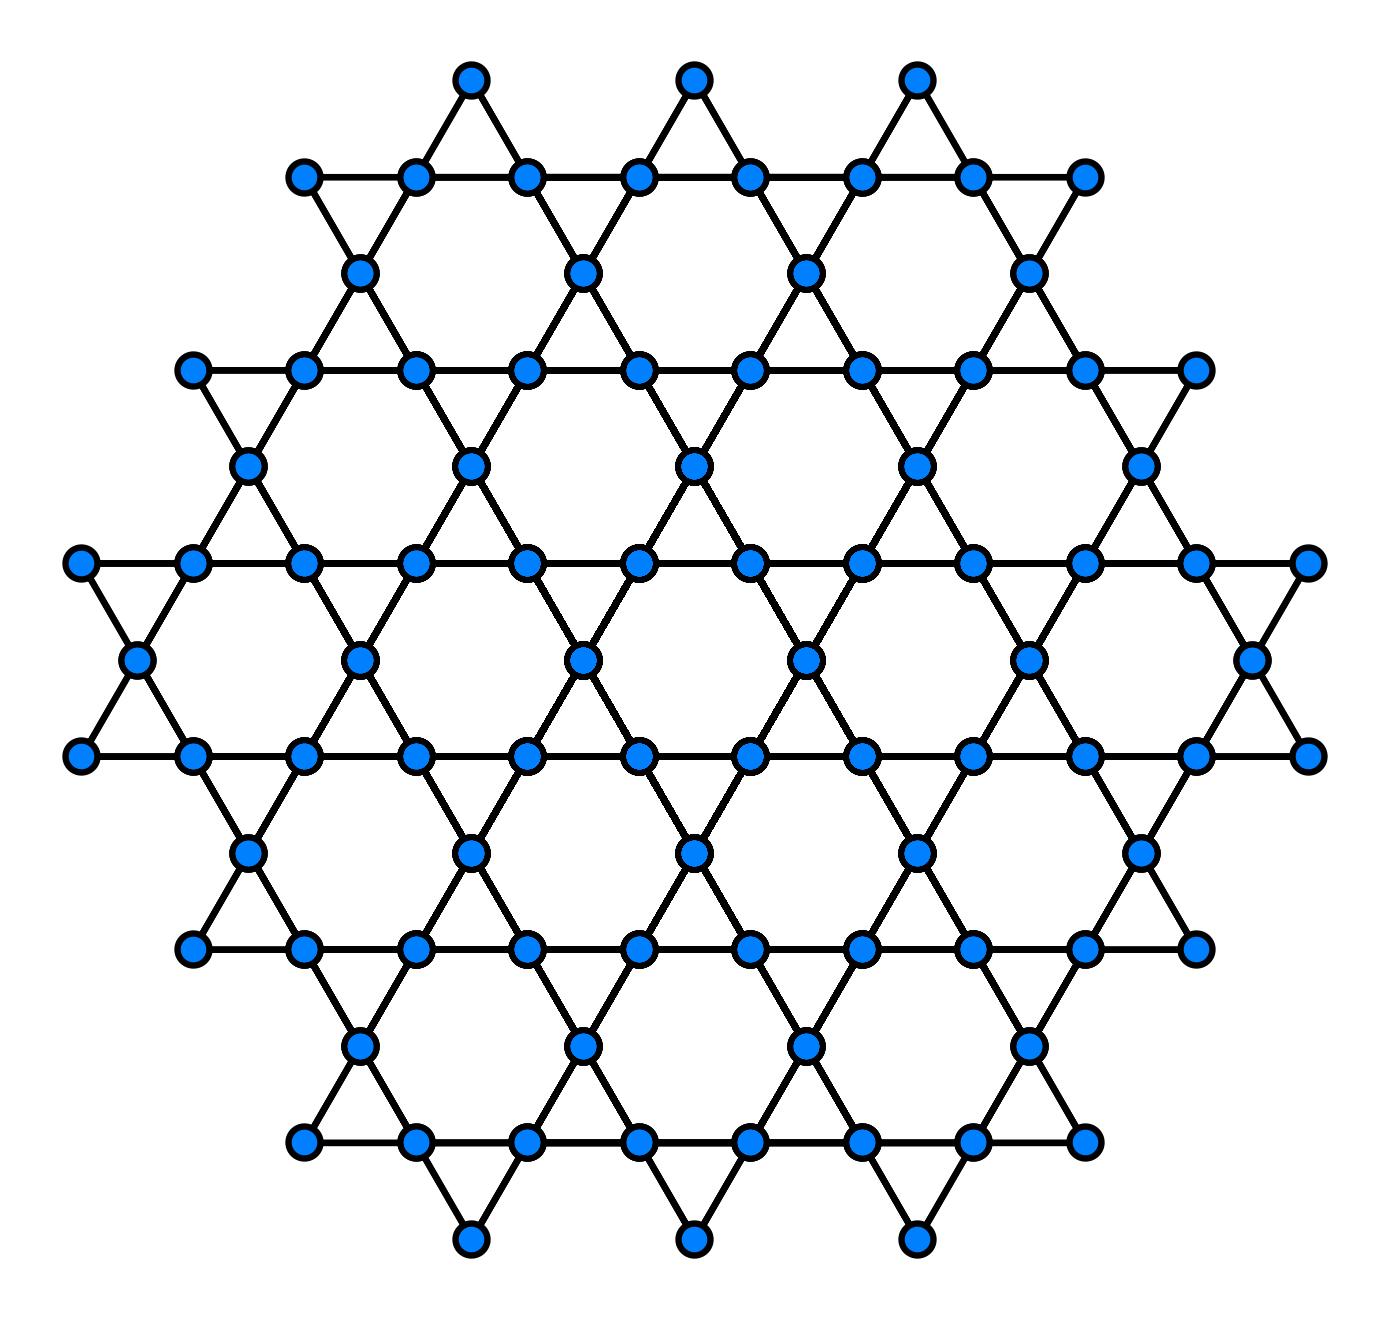 The kagome lattice is a pattern of corner-sharing triangles.